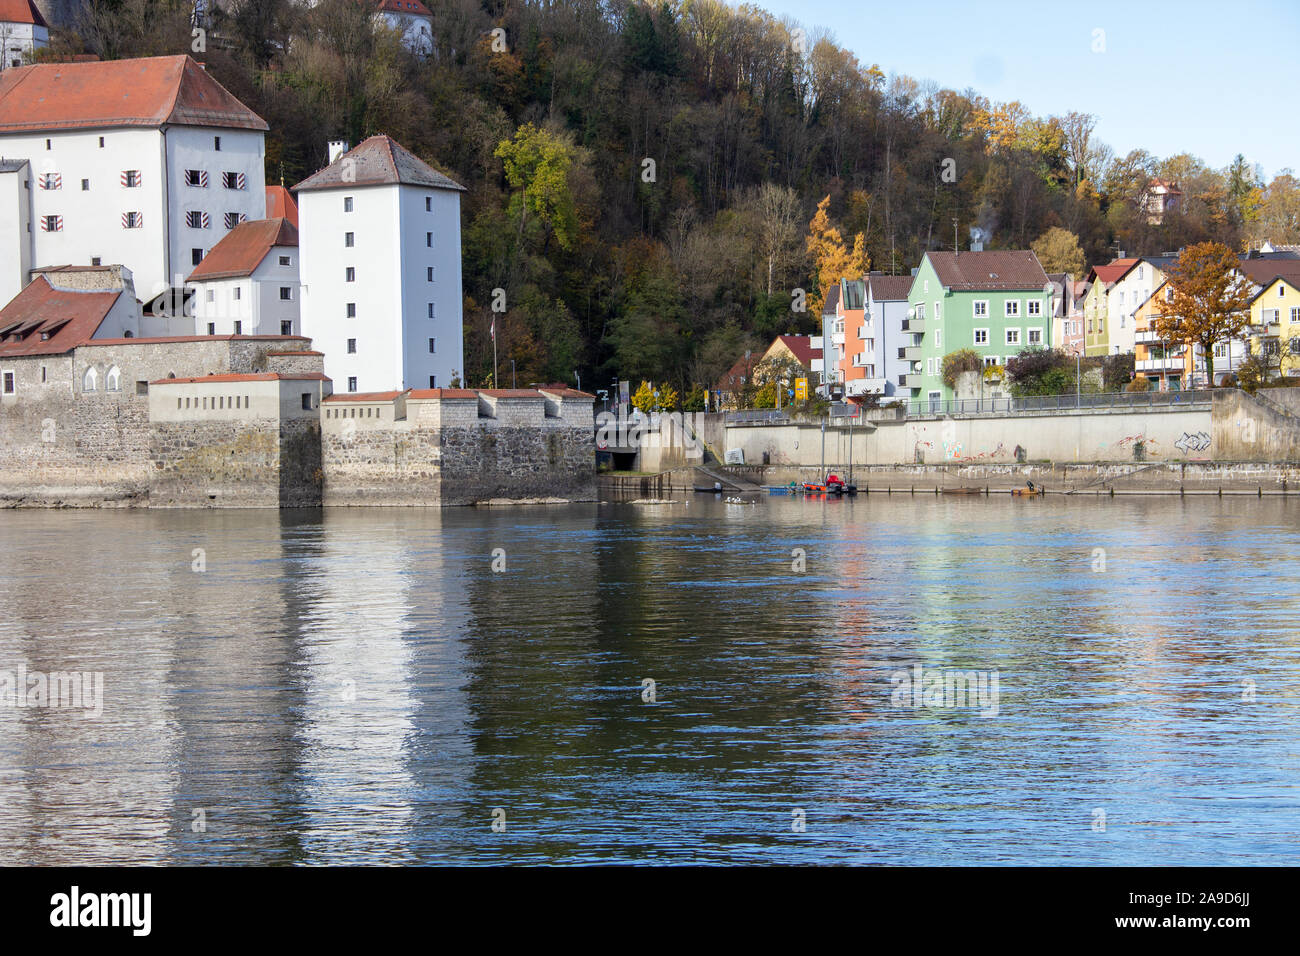 Confluence of the rivers Iltz, Inn and Danube in Passau, Germany Stock Photo